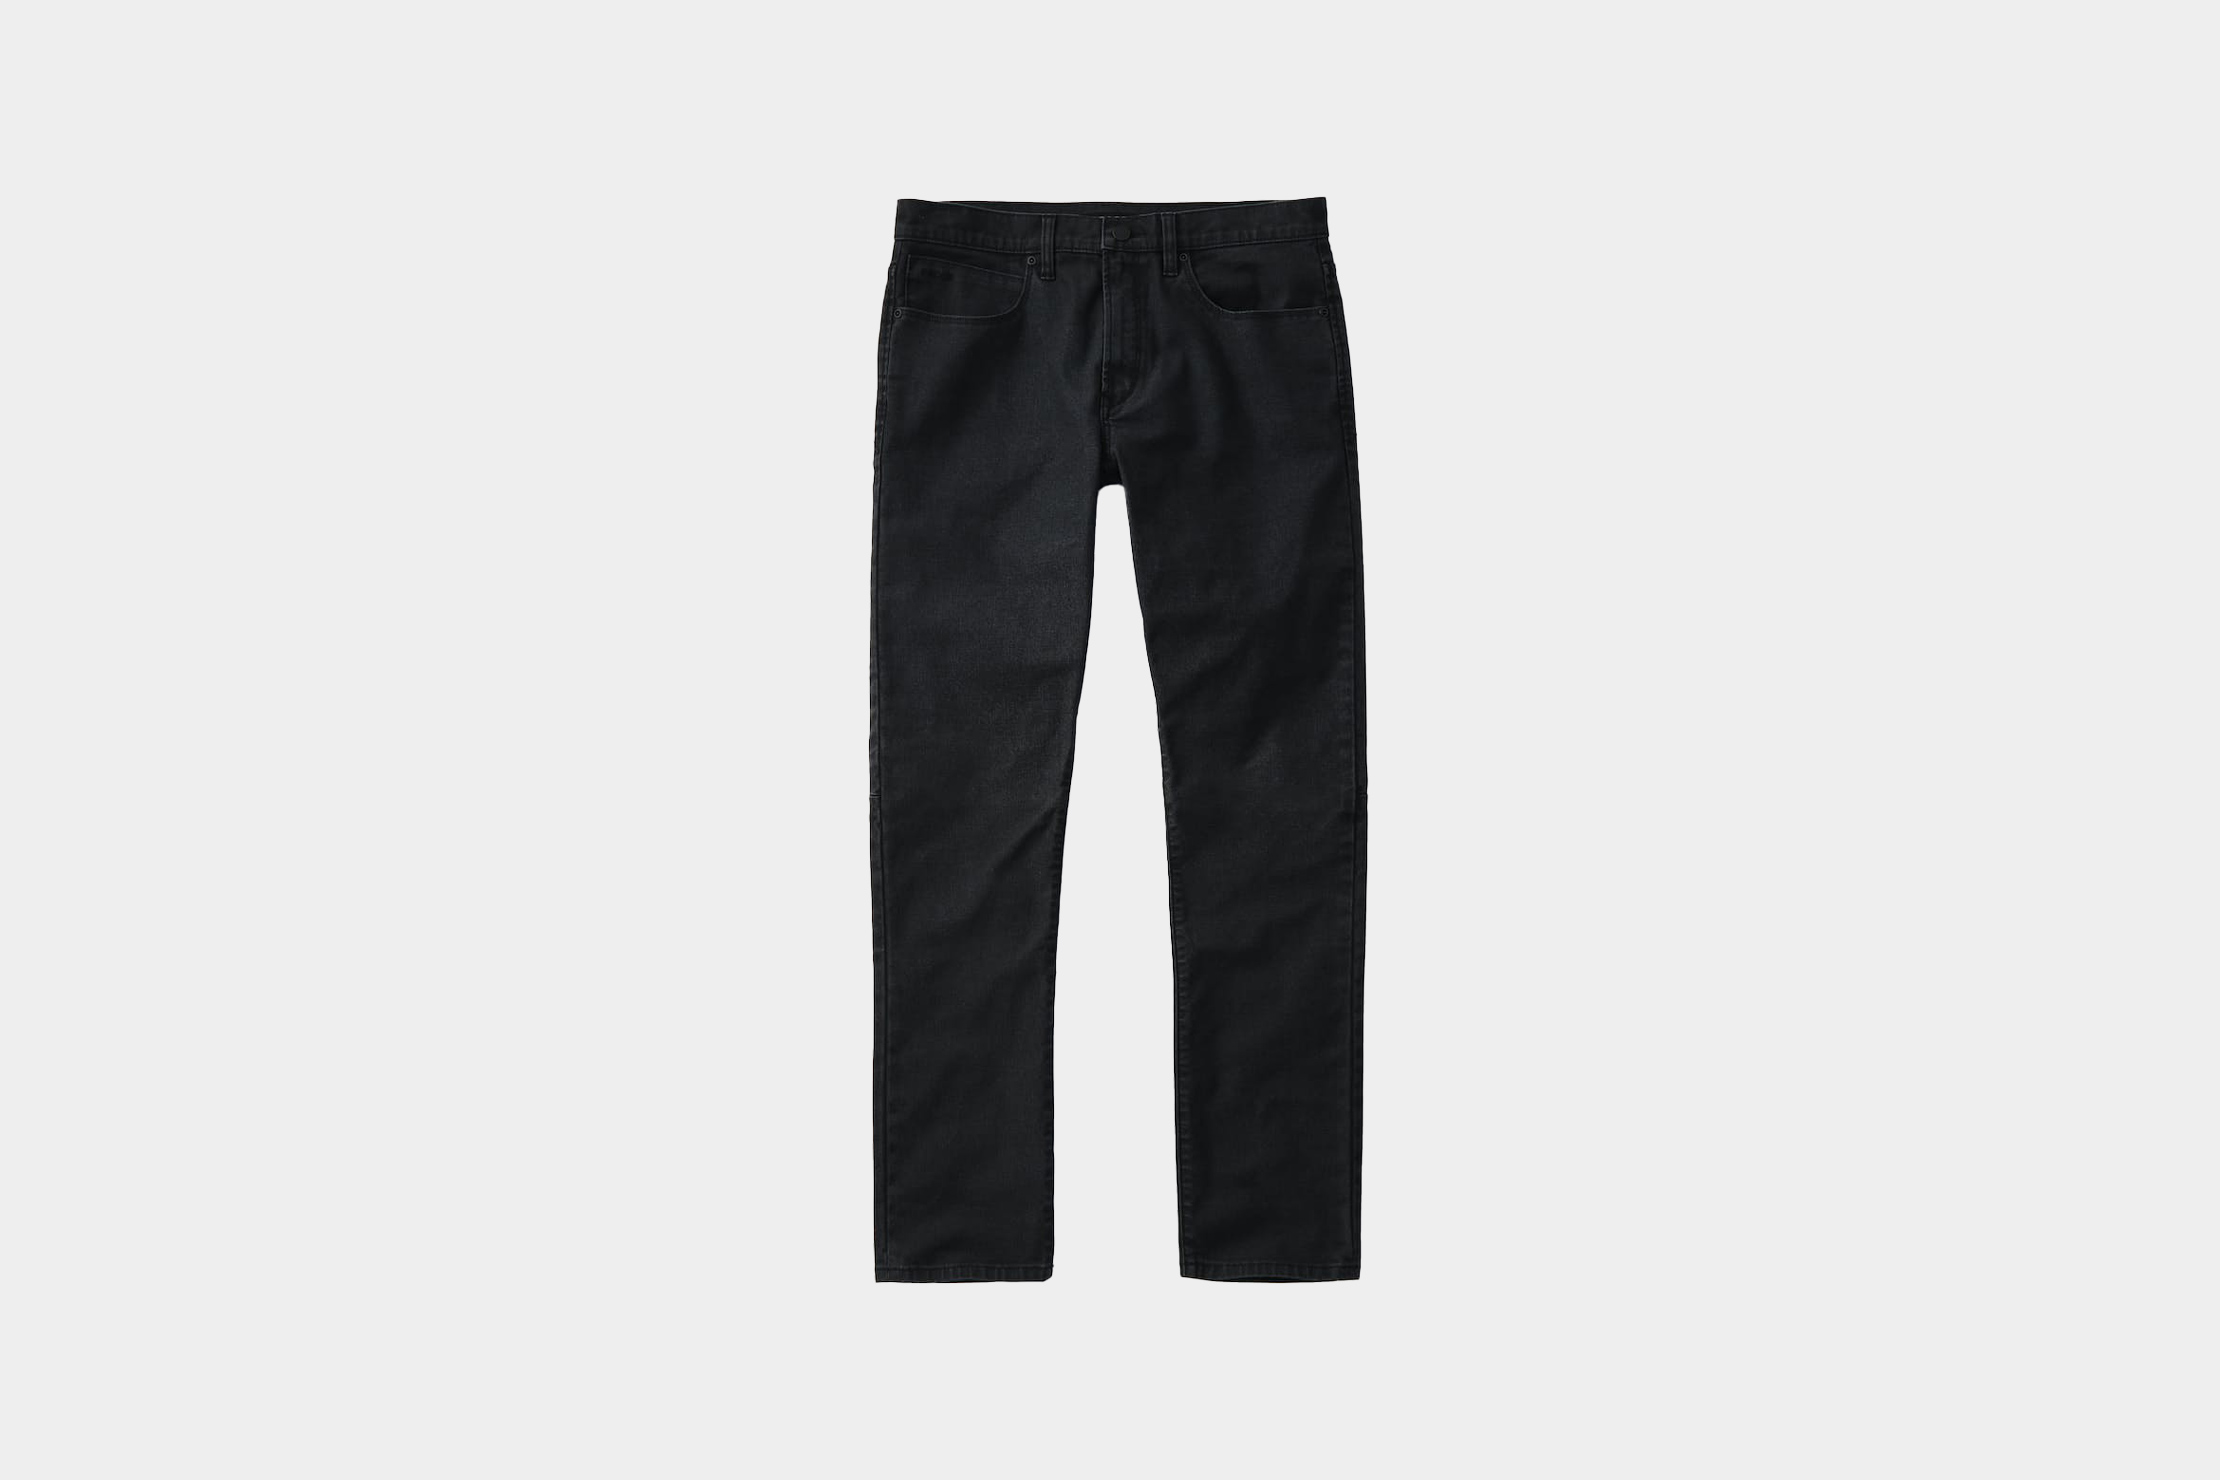 Proof Rover Pant (Slim) Review